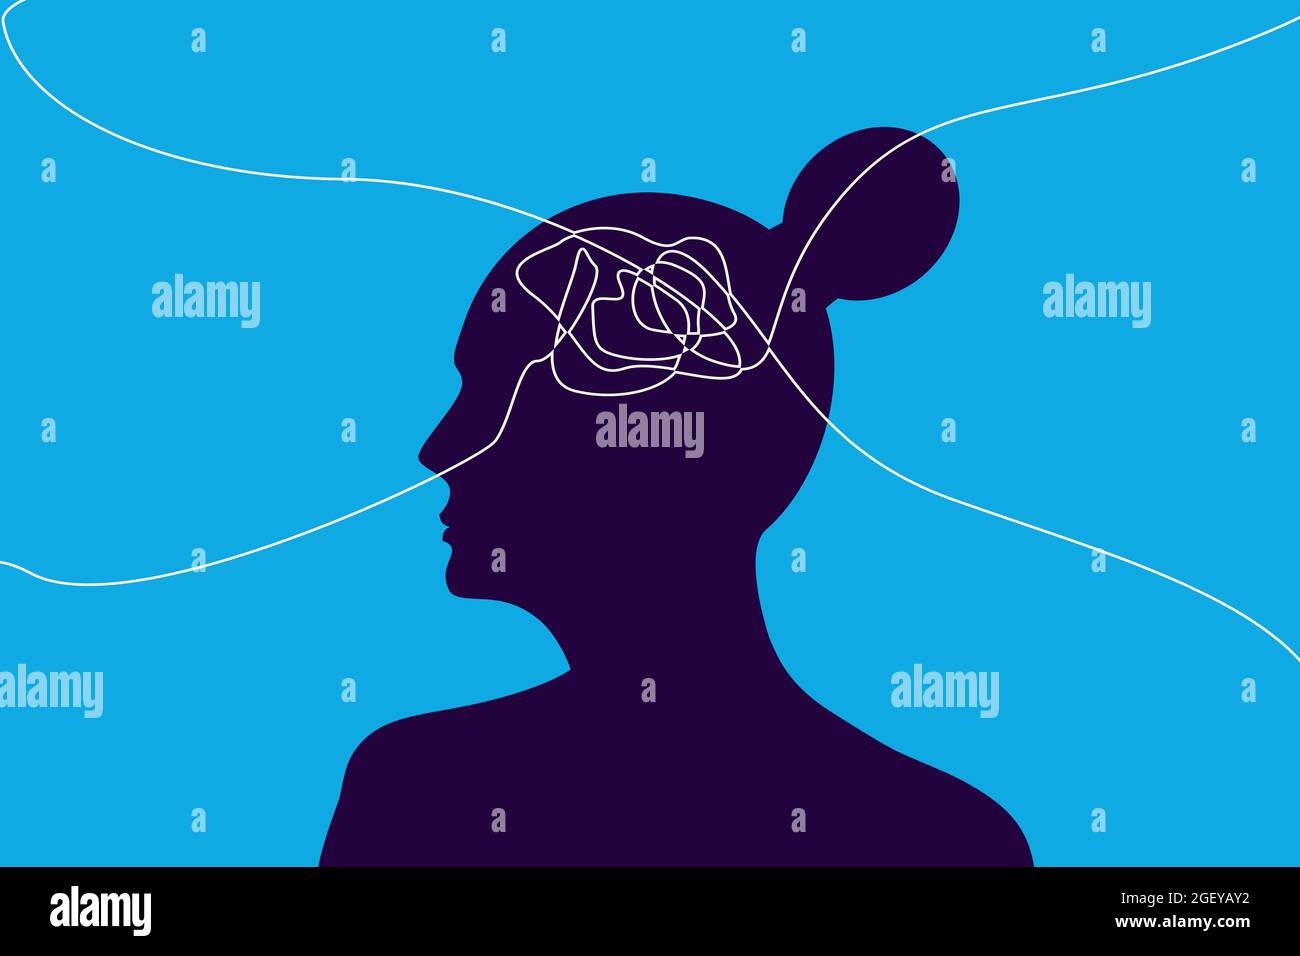 Woman Psychology Concept Idea. Silhouette of a Female Head With complicated line. Women Mental health and Psychological Studies Of adult Women. Stock Photo